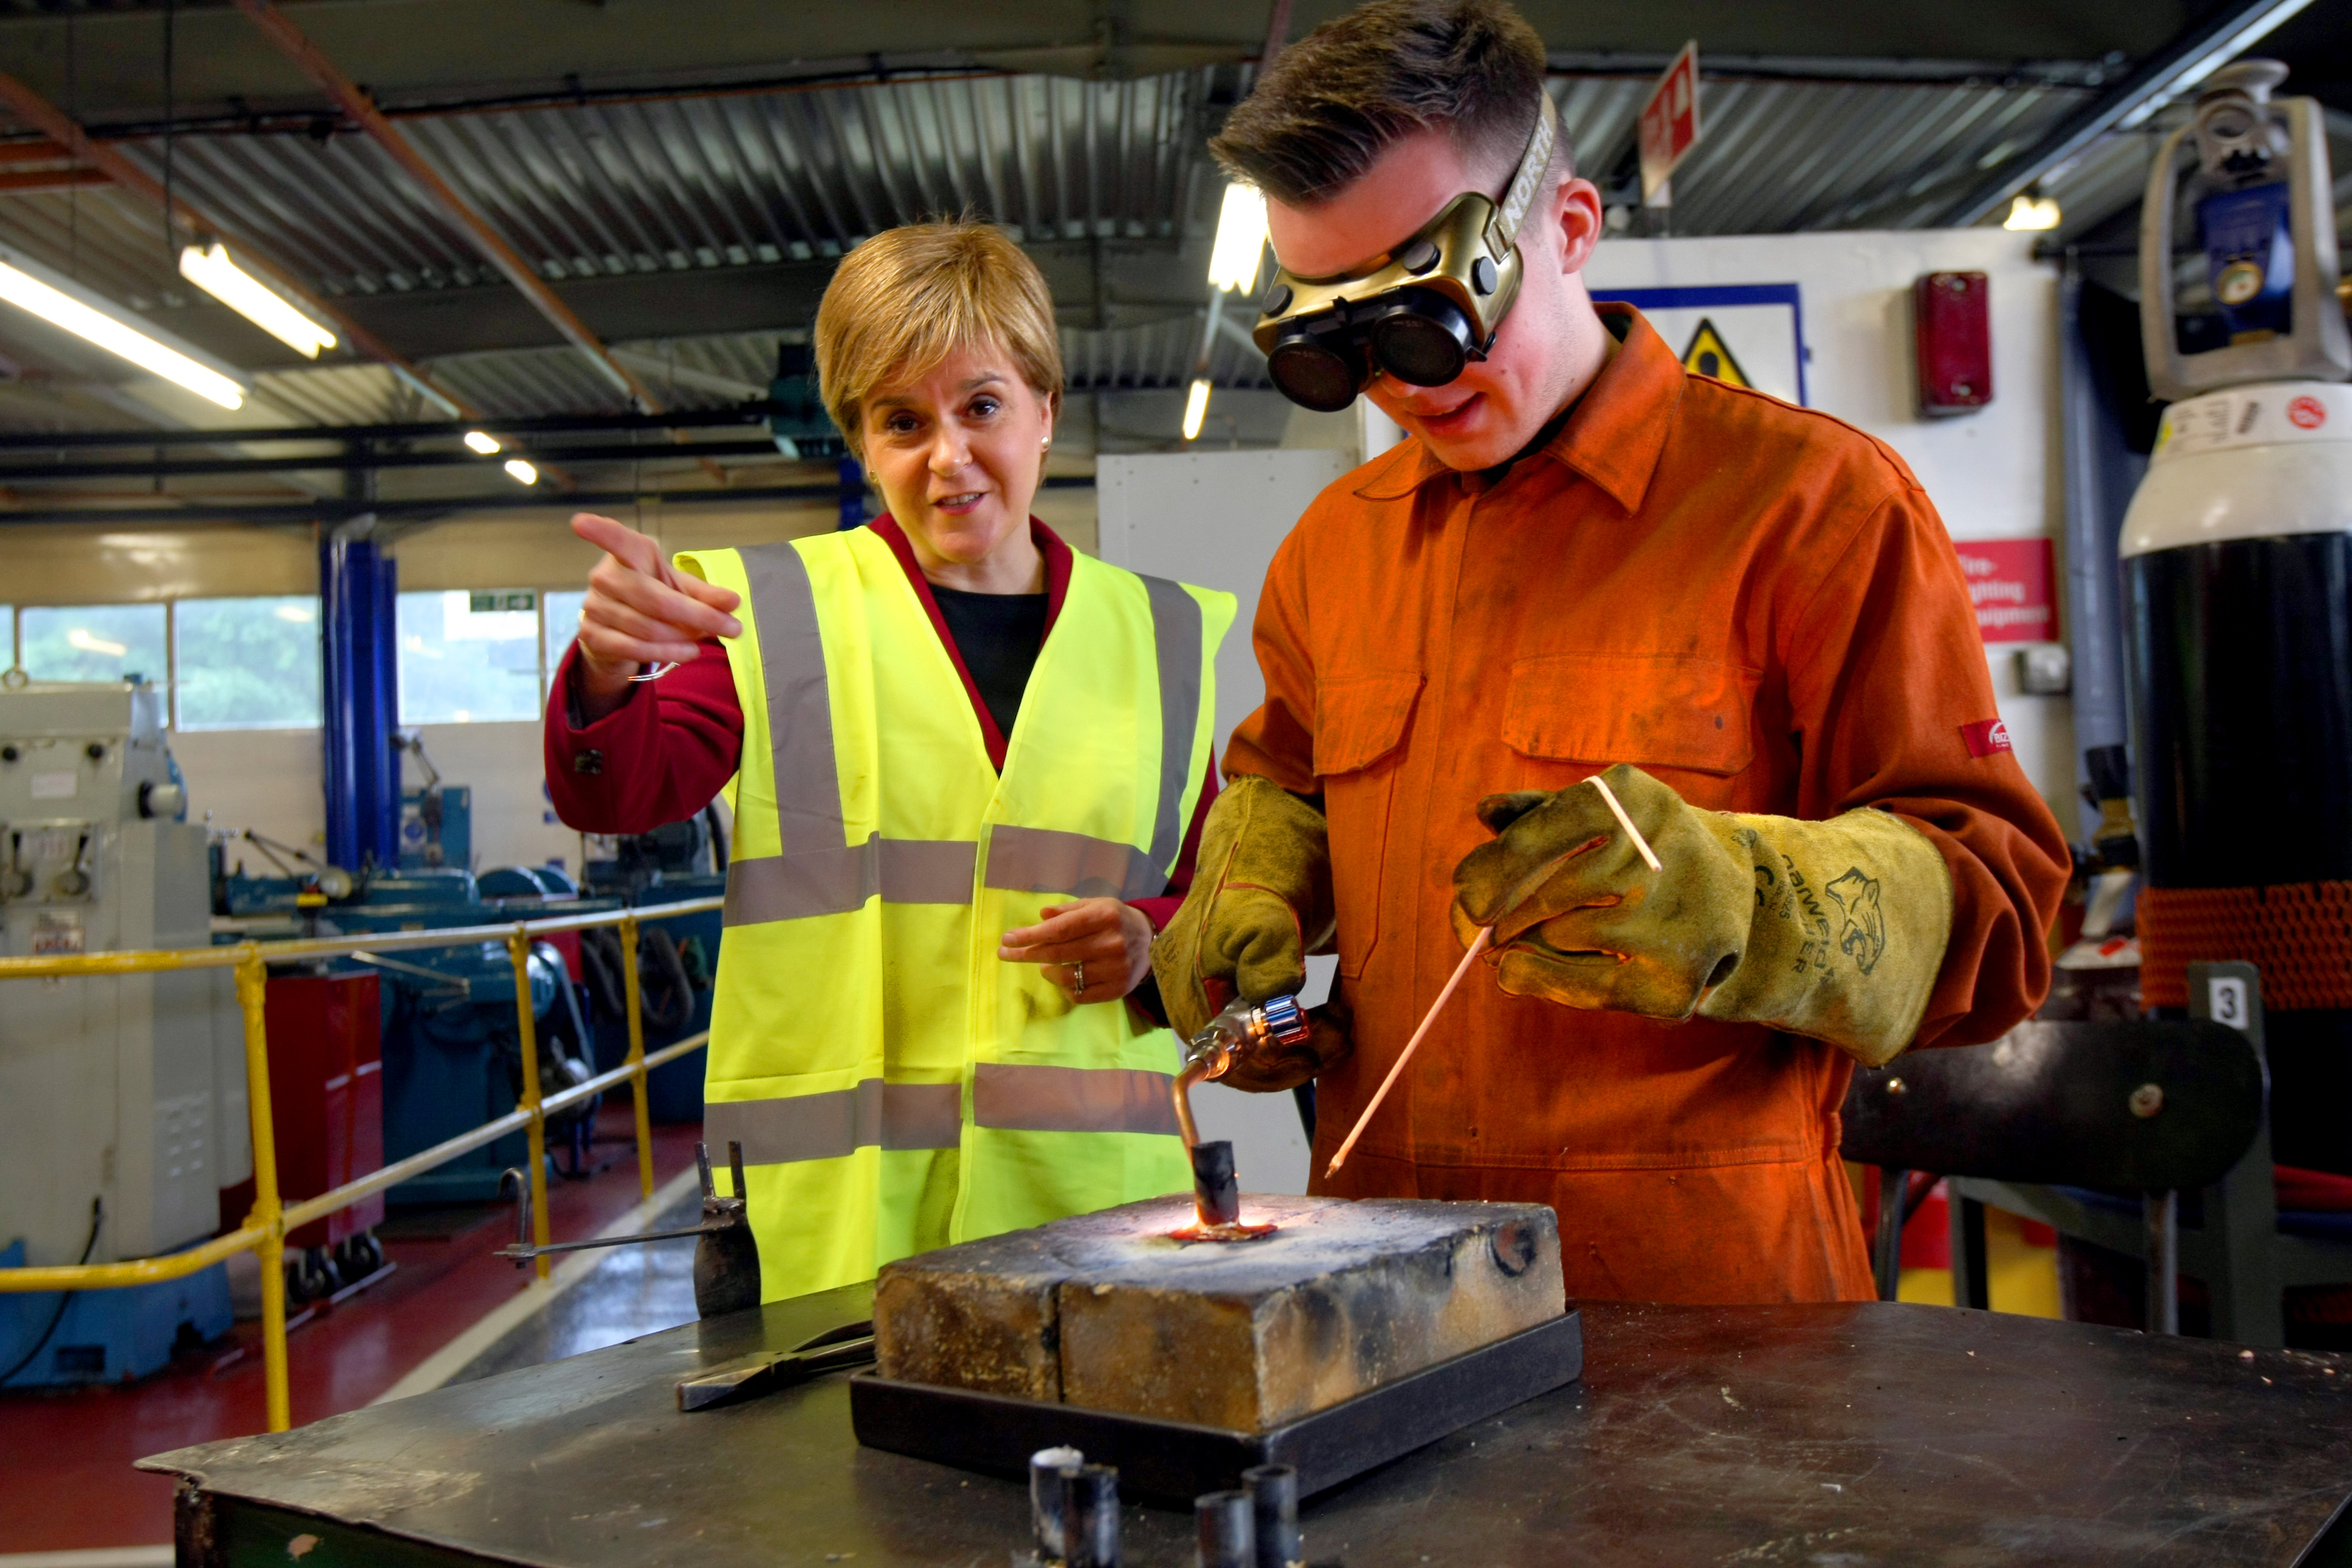 First Minister Nicola Sturgeon on a previous visit to the Michelin plant in Dundee.